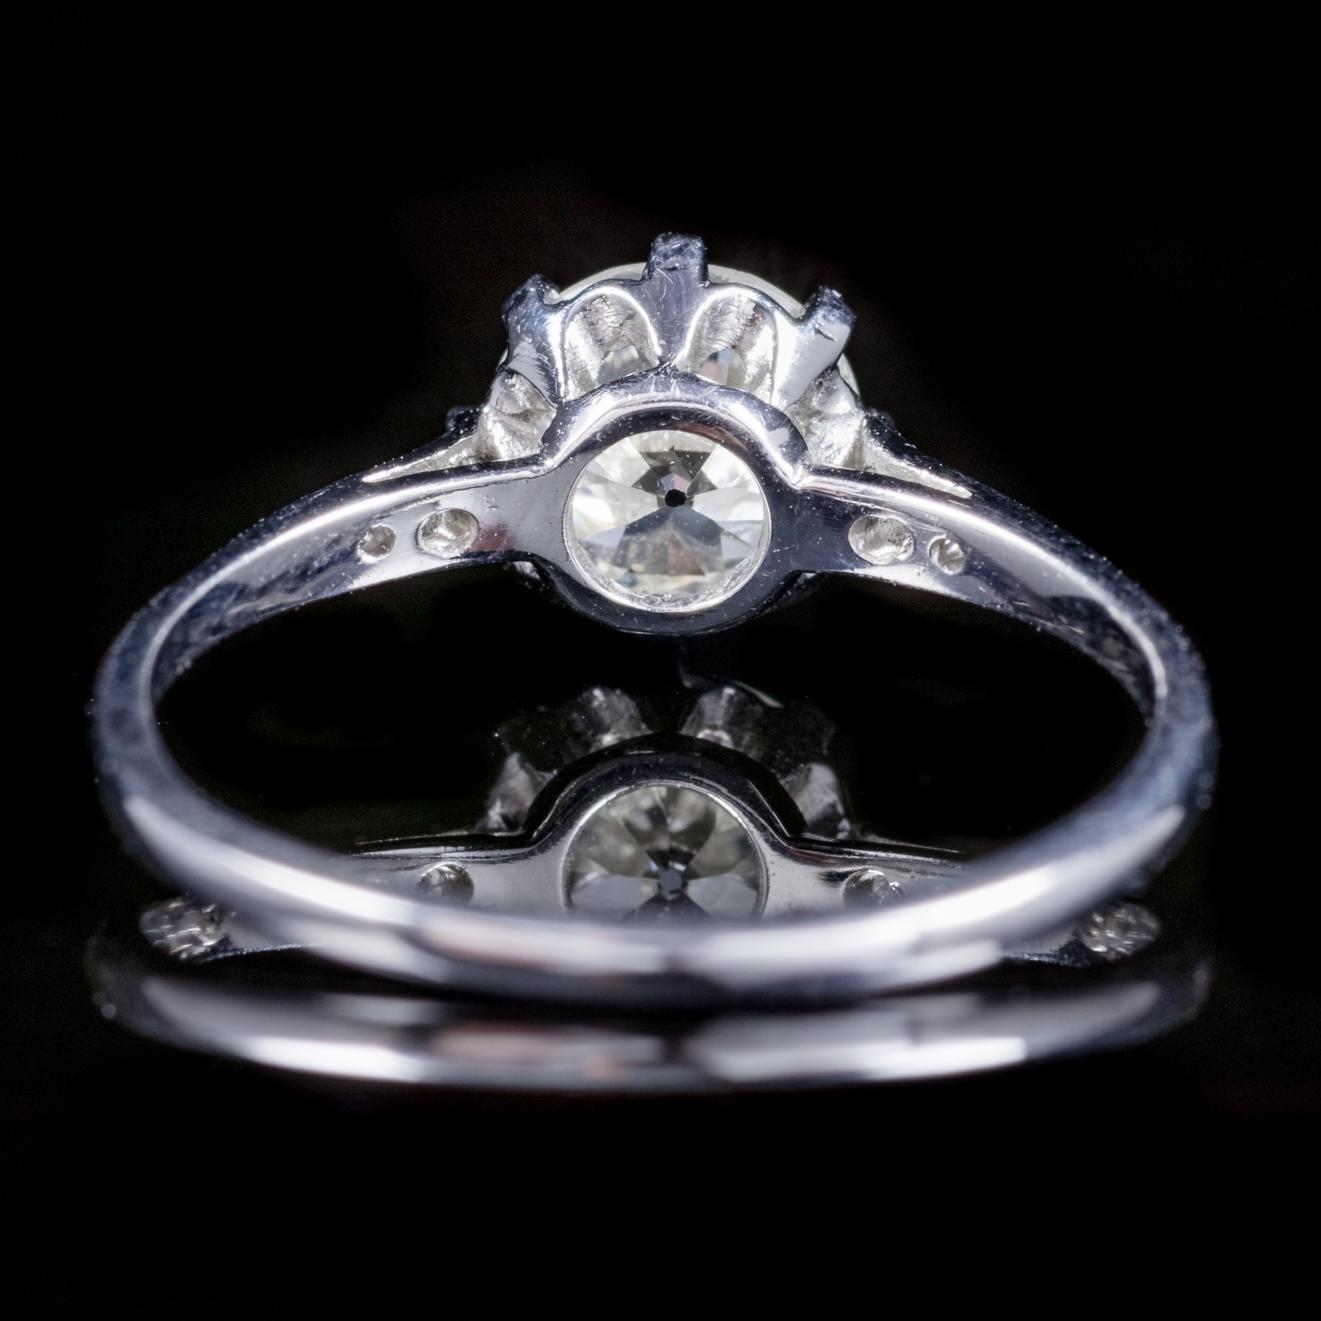 Antique Edwardian Old Cut Diamond Engagement Ring 18 Carat Gold, circa 1910 In Good Condition For Sale In Lancaster, Lancashire